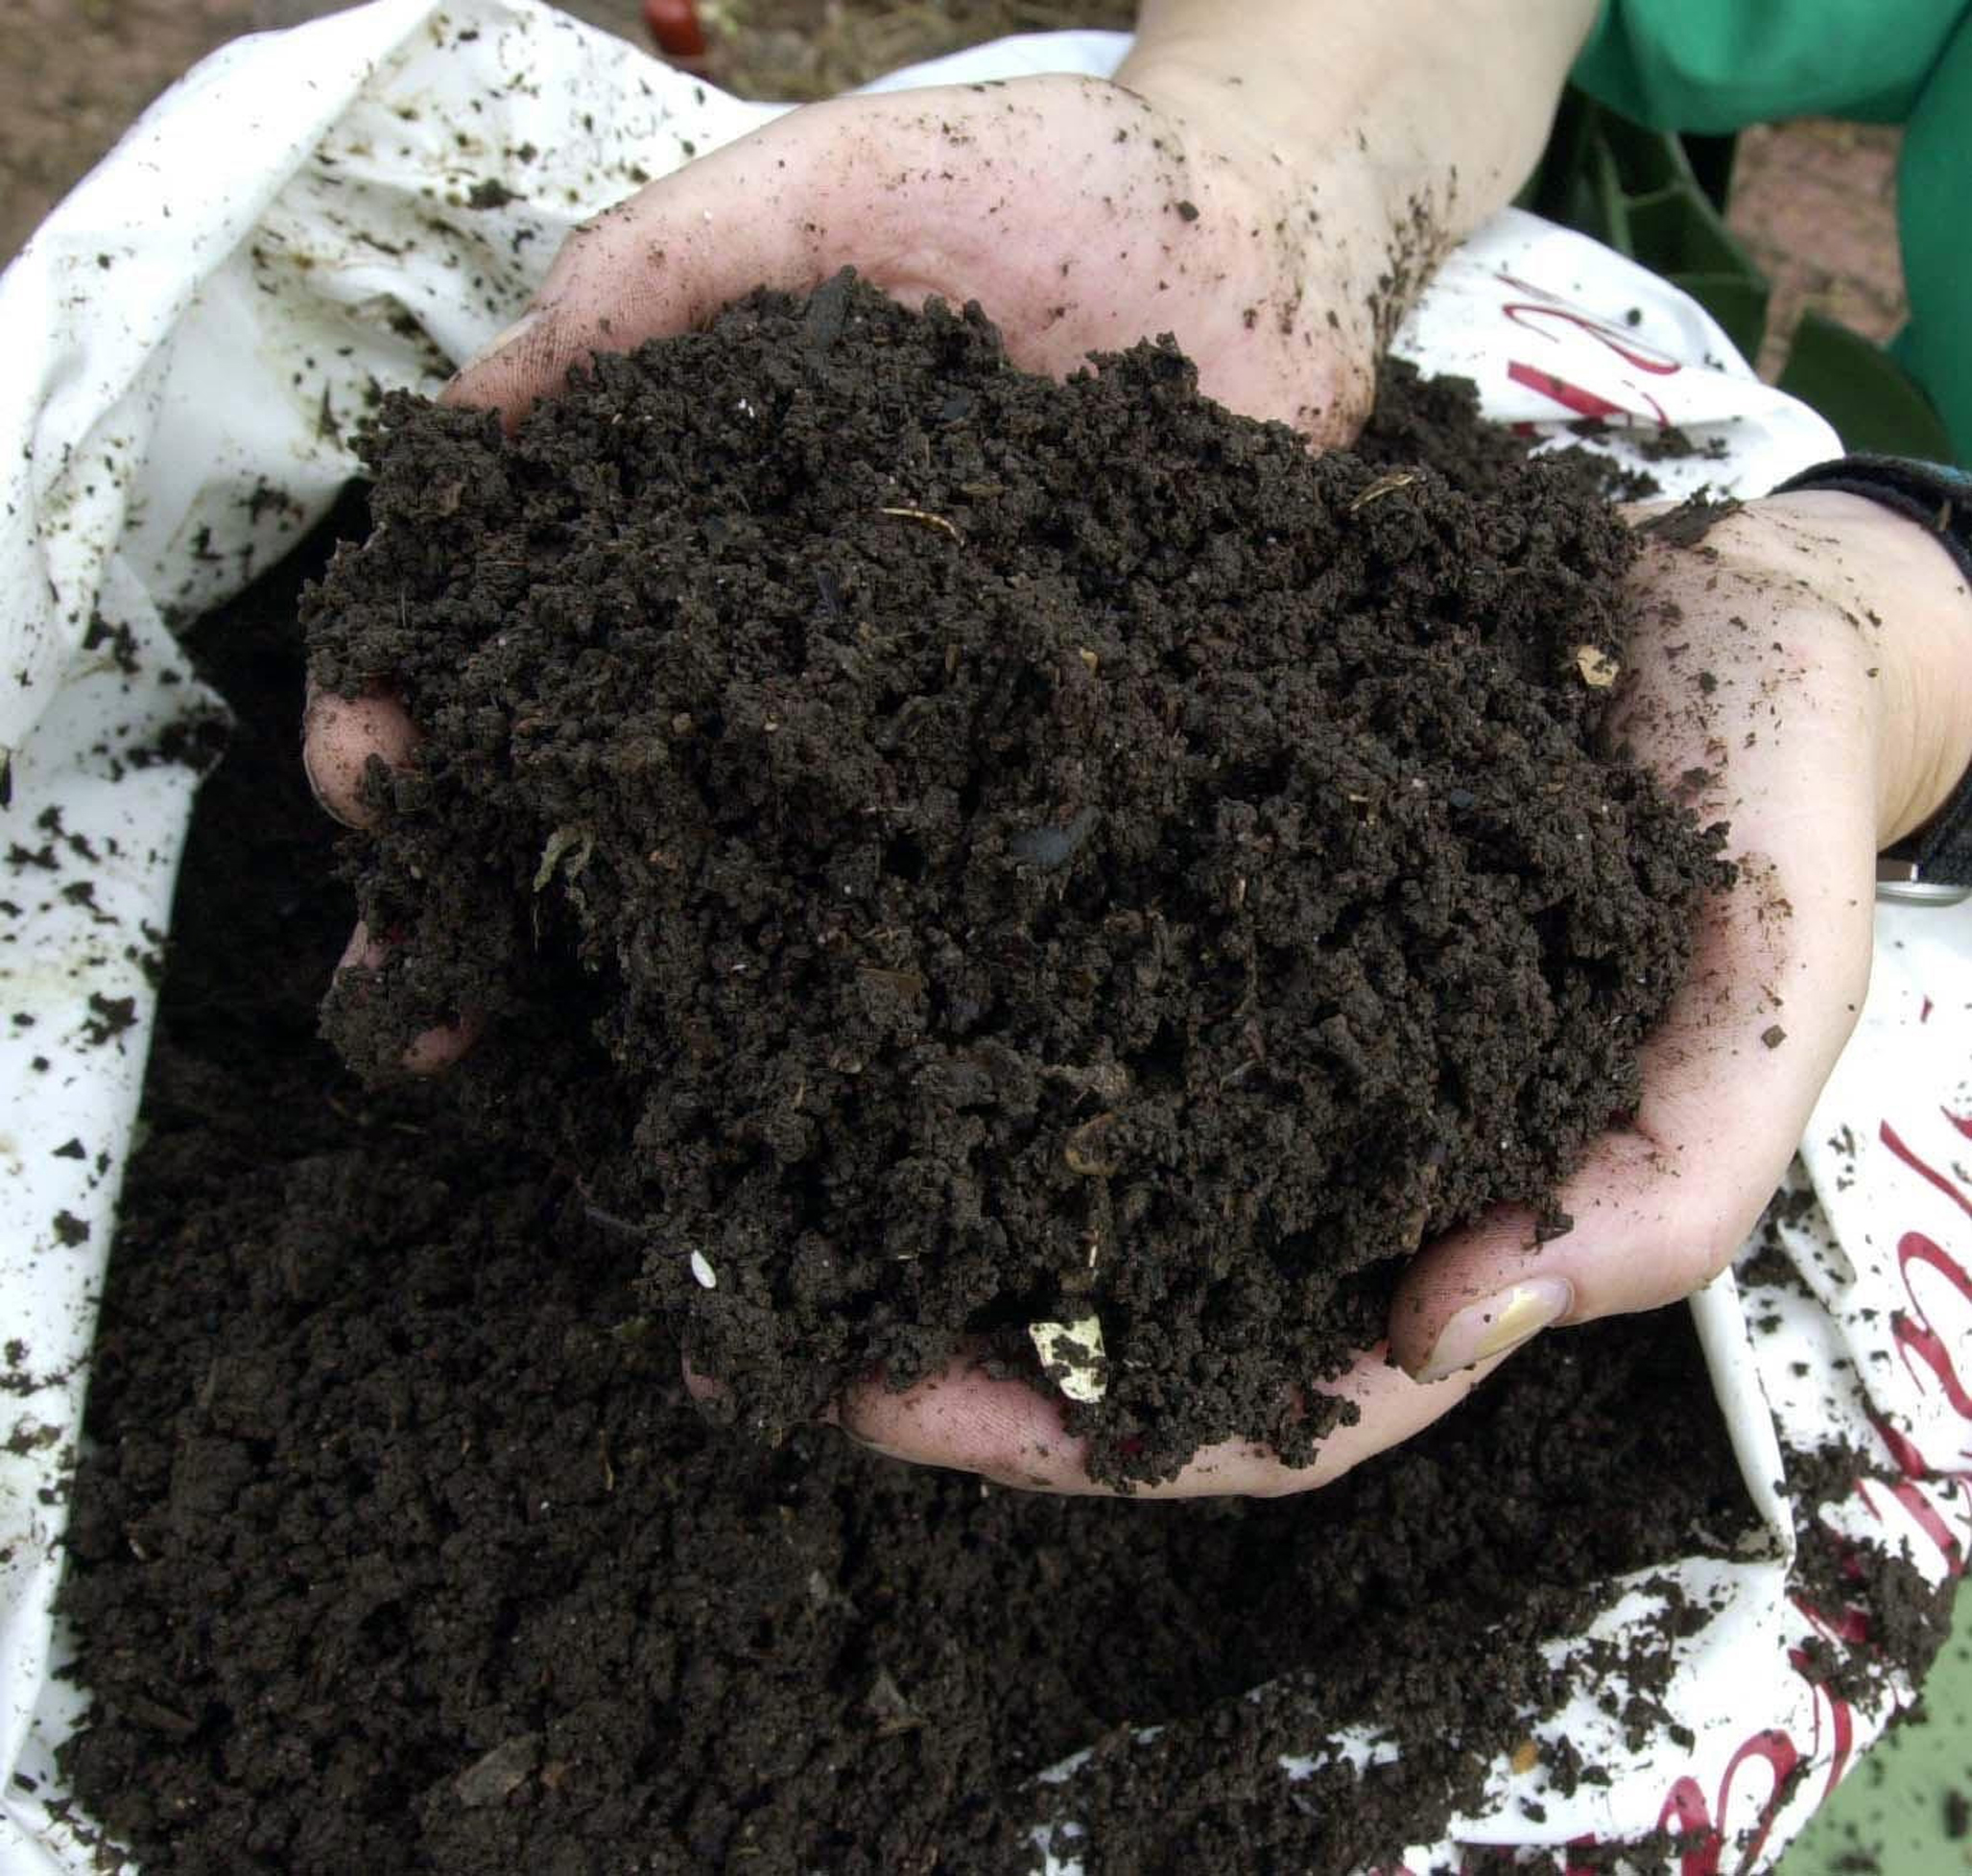 Enrich your soil before planting (Barry Batchelor/PA)